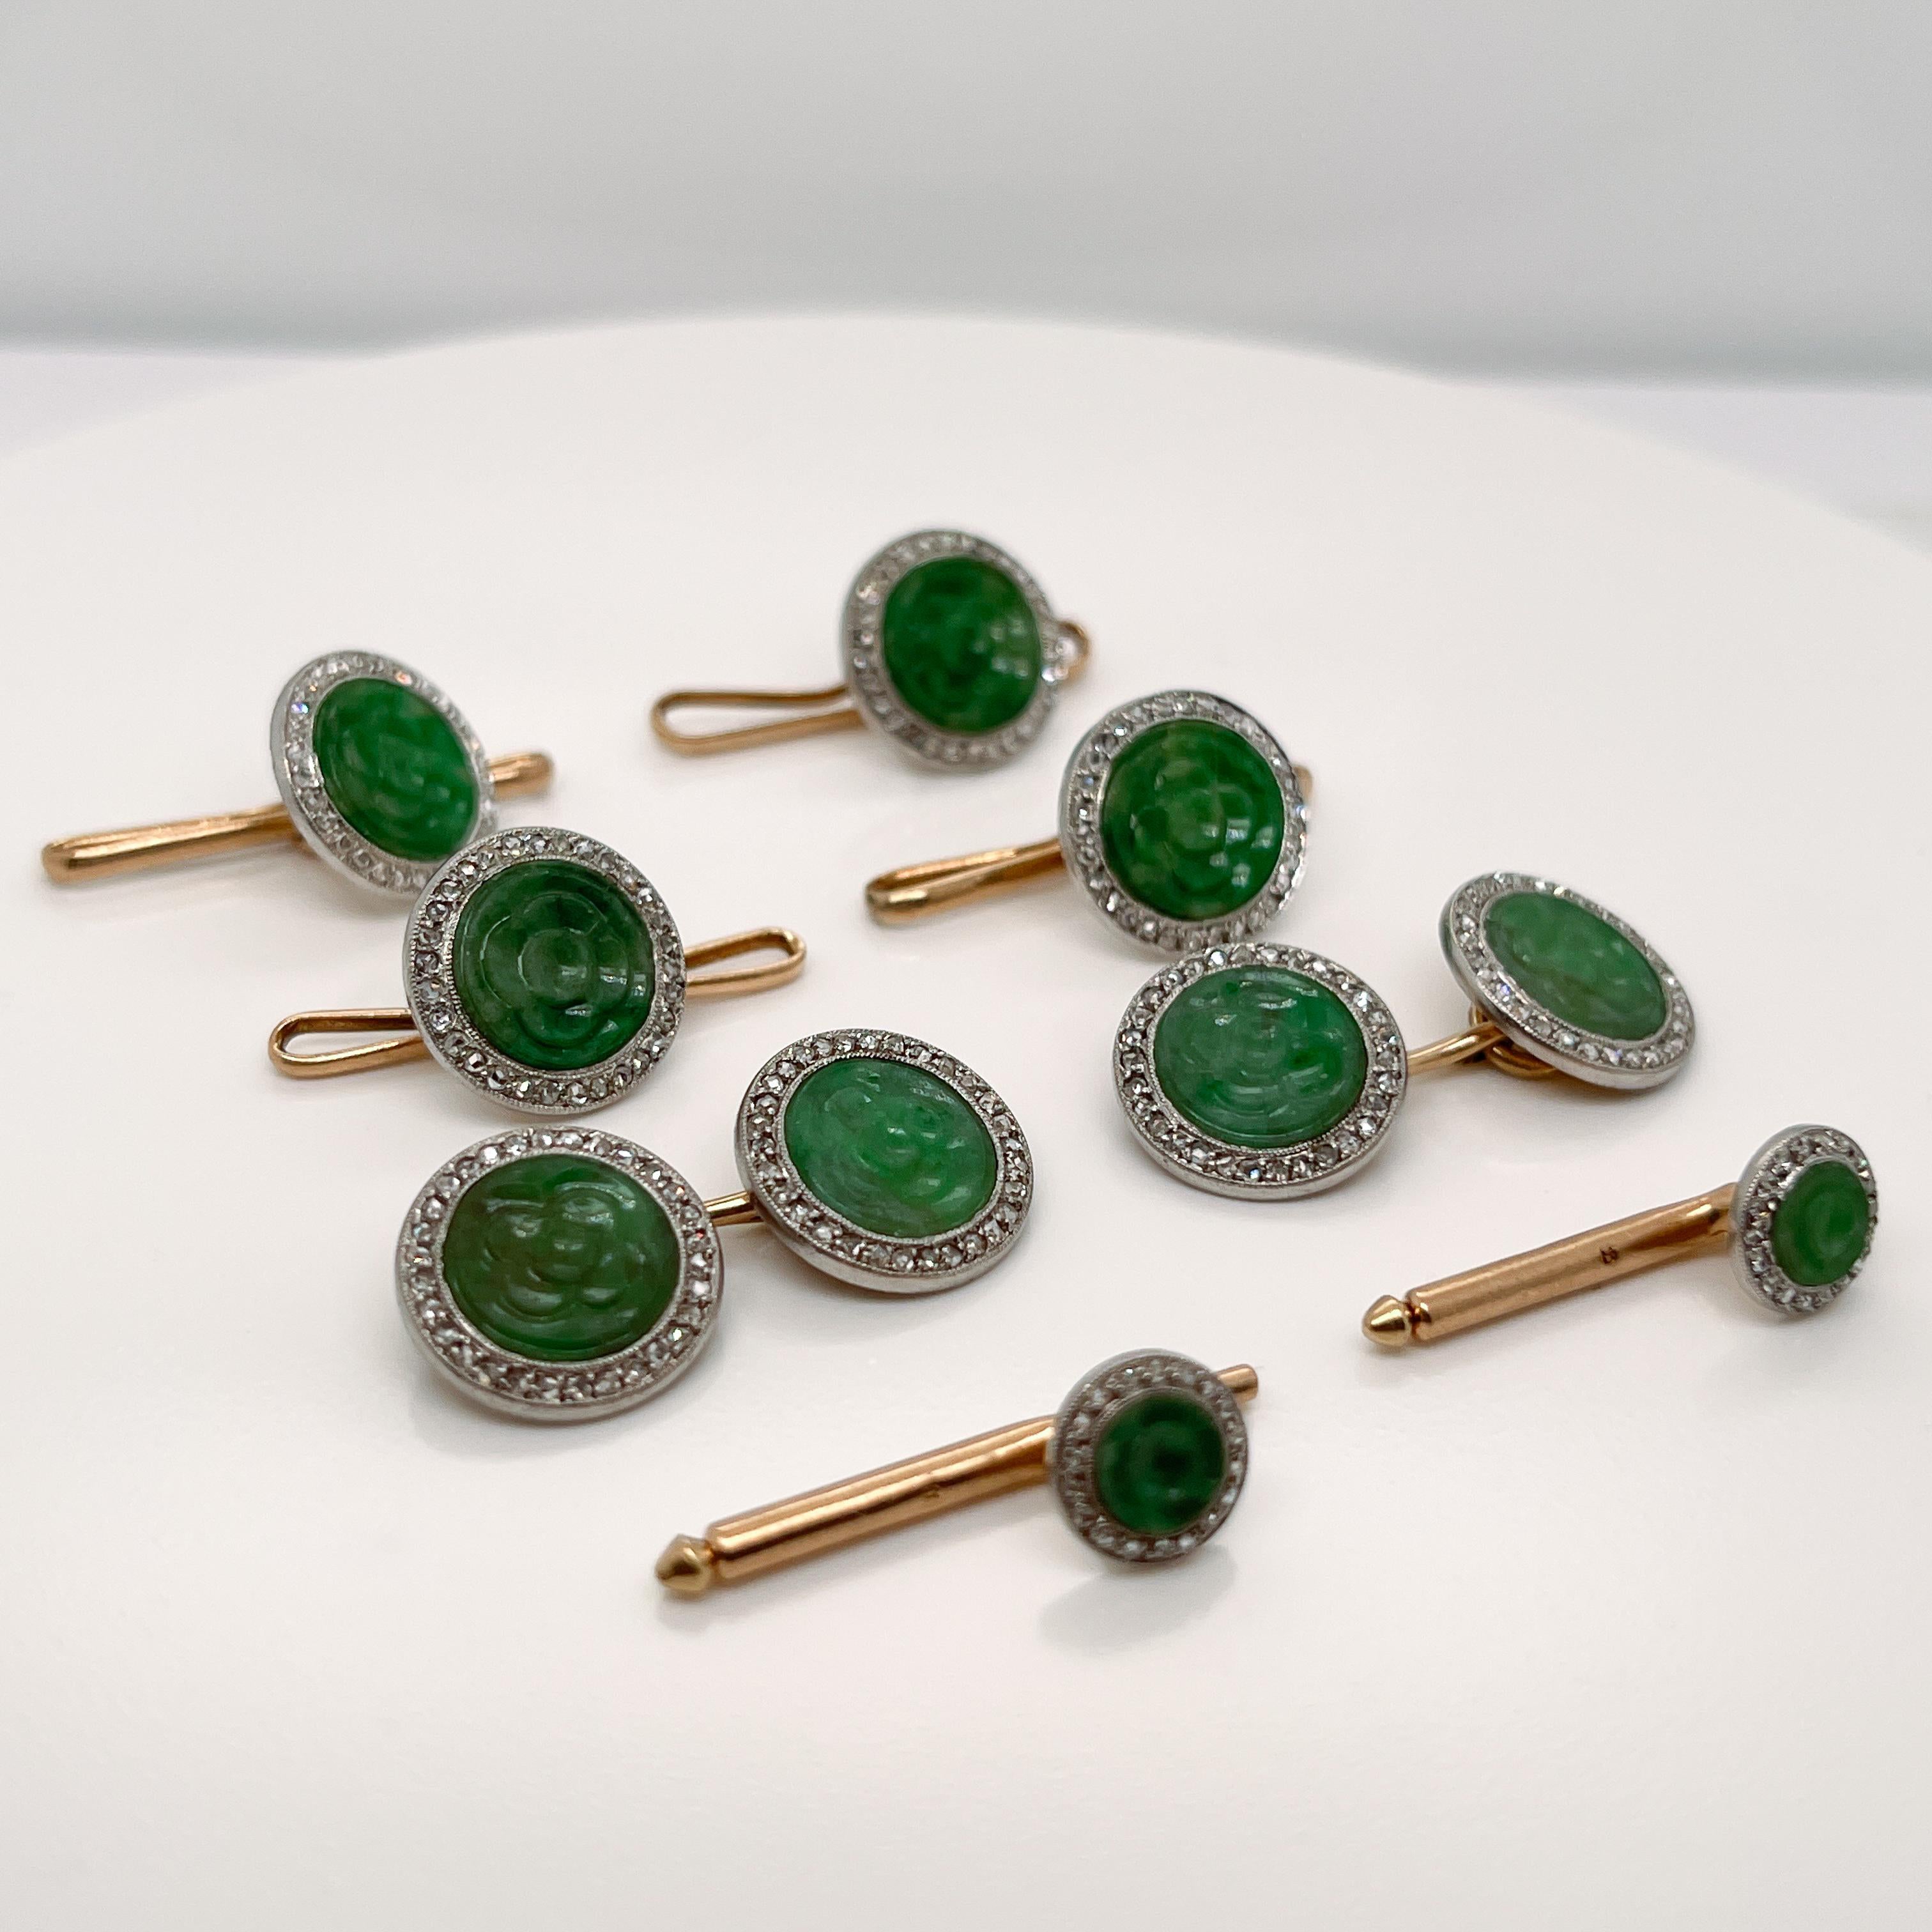 A very fine Art Deco period cufflink and dress set. 

In platinum-topped 14k yellow gold and set with a jade (jadeite) cabochons framed by tiny rose cut diamonds.  

Each flat jade (jadeite) cabochon is carved with a stylized floral device.

The set